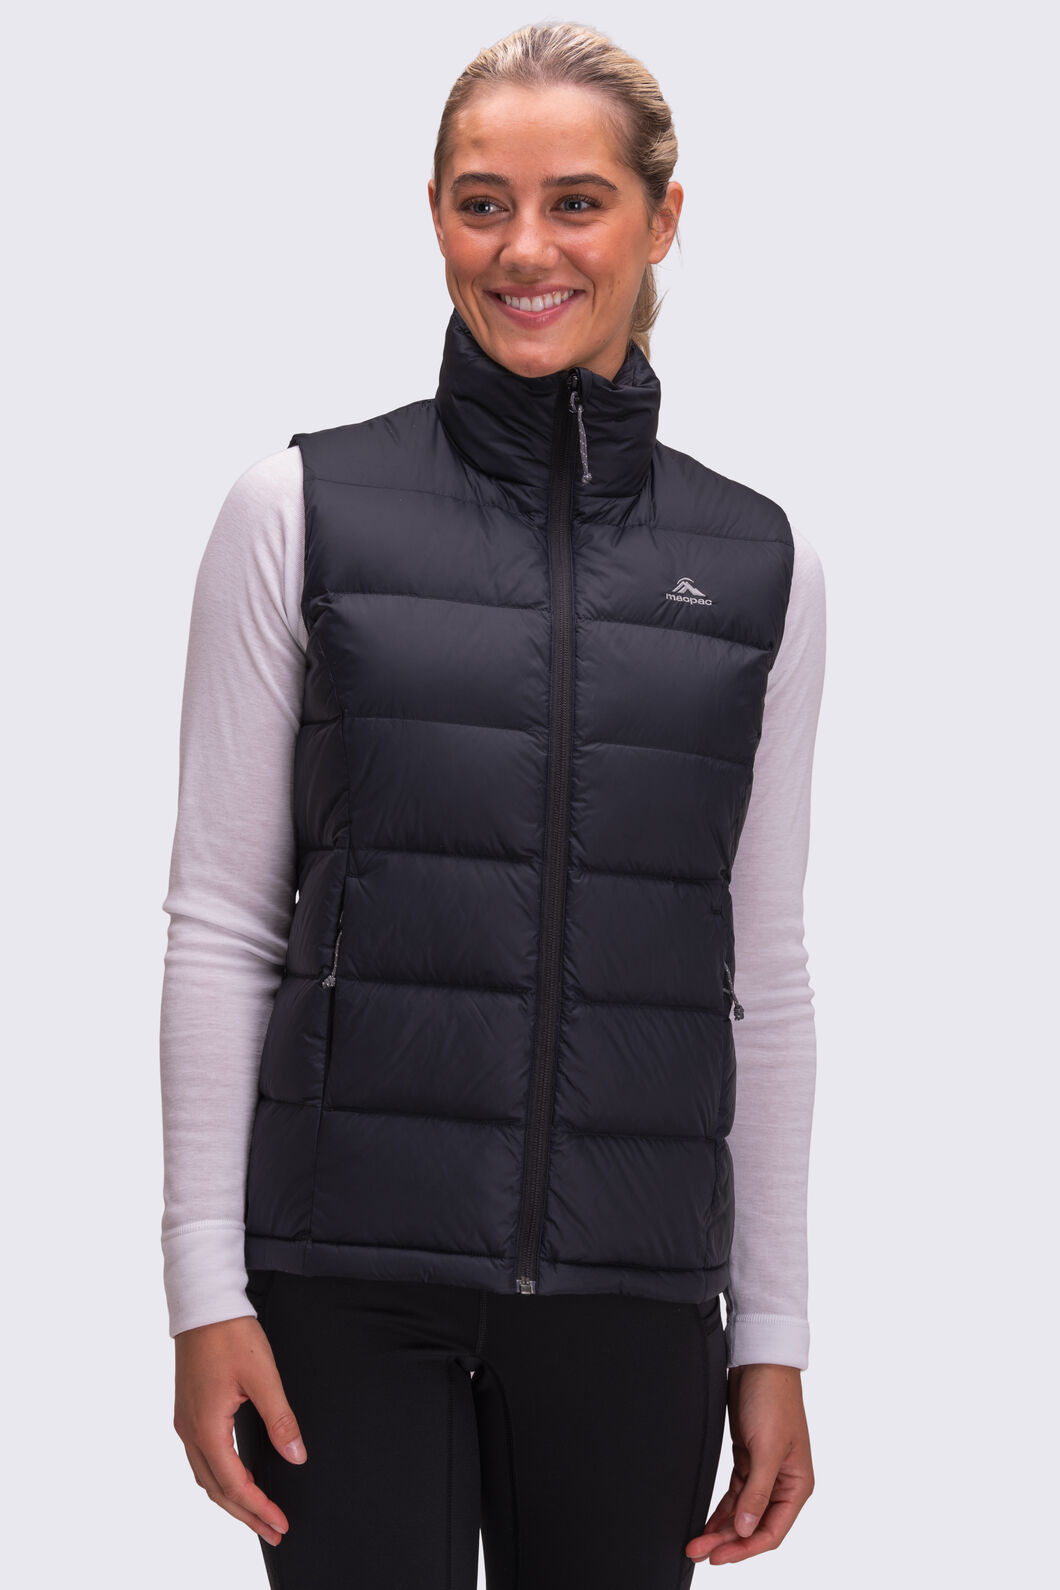 Unlock Wilderness' choice in the Macpac Vs Patagonia comparison, the Women's Halo Down Vest by Macpac